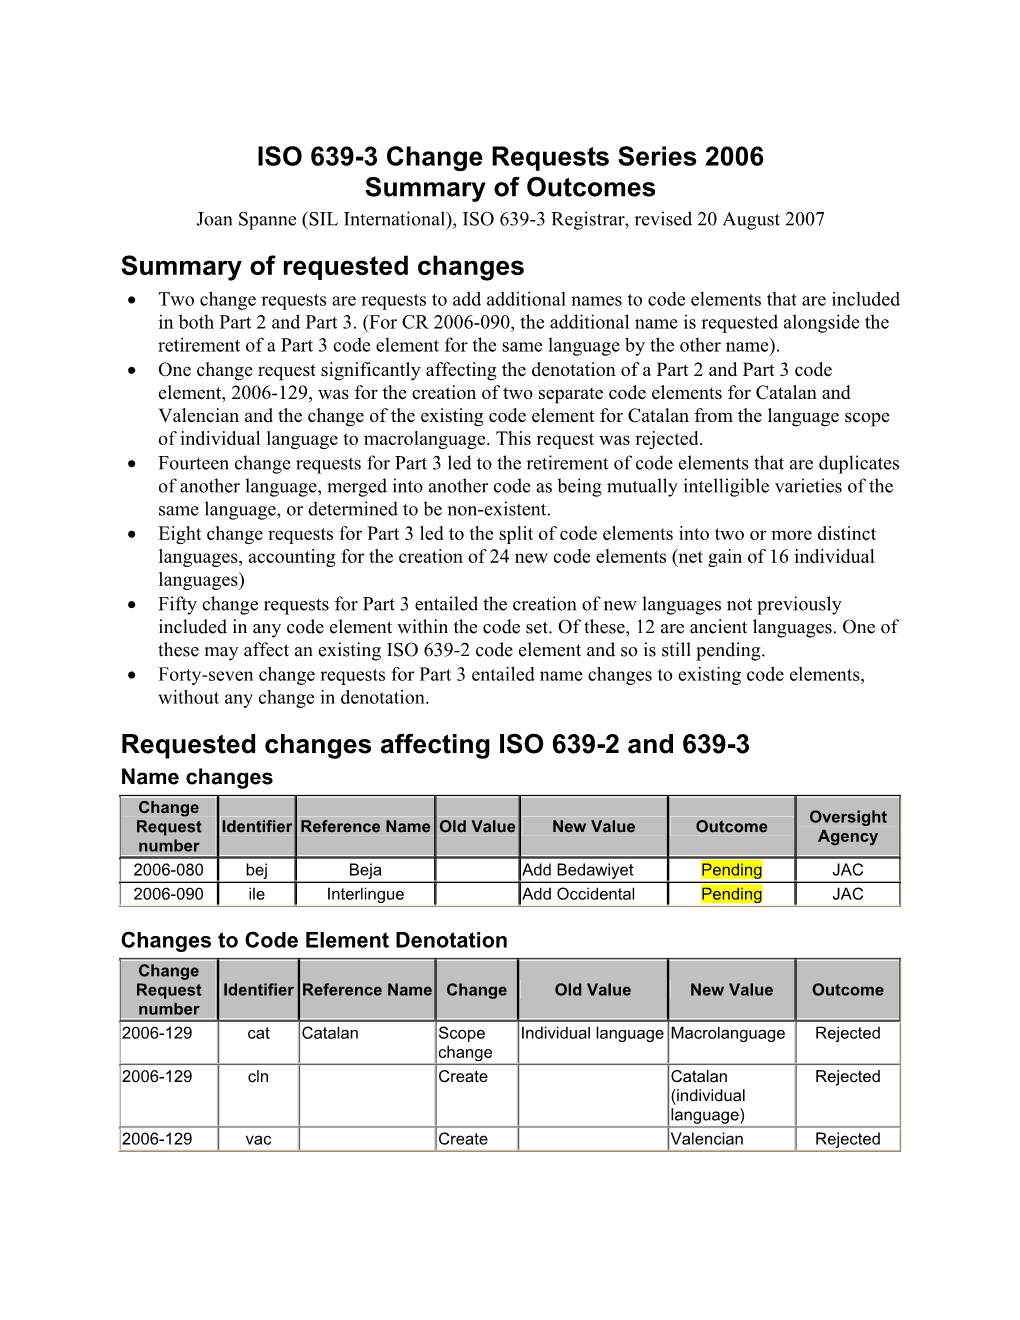 ISO 639-3 Change Requests Series 2006 Summary of Outcomes